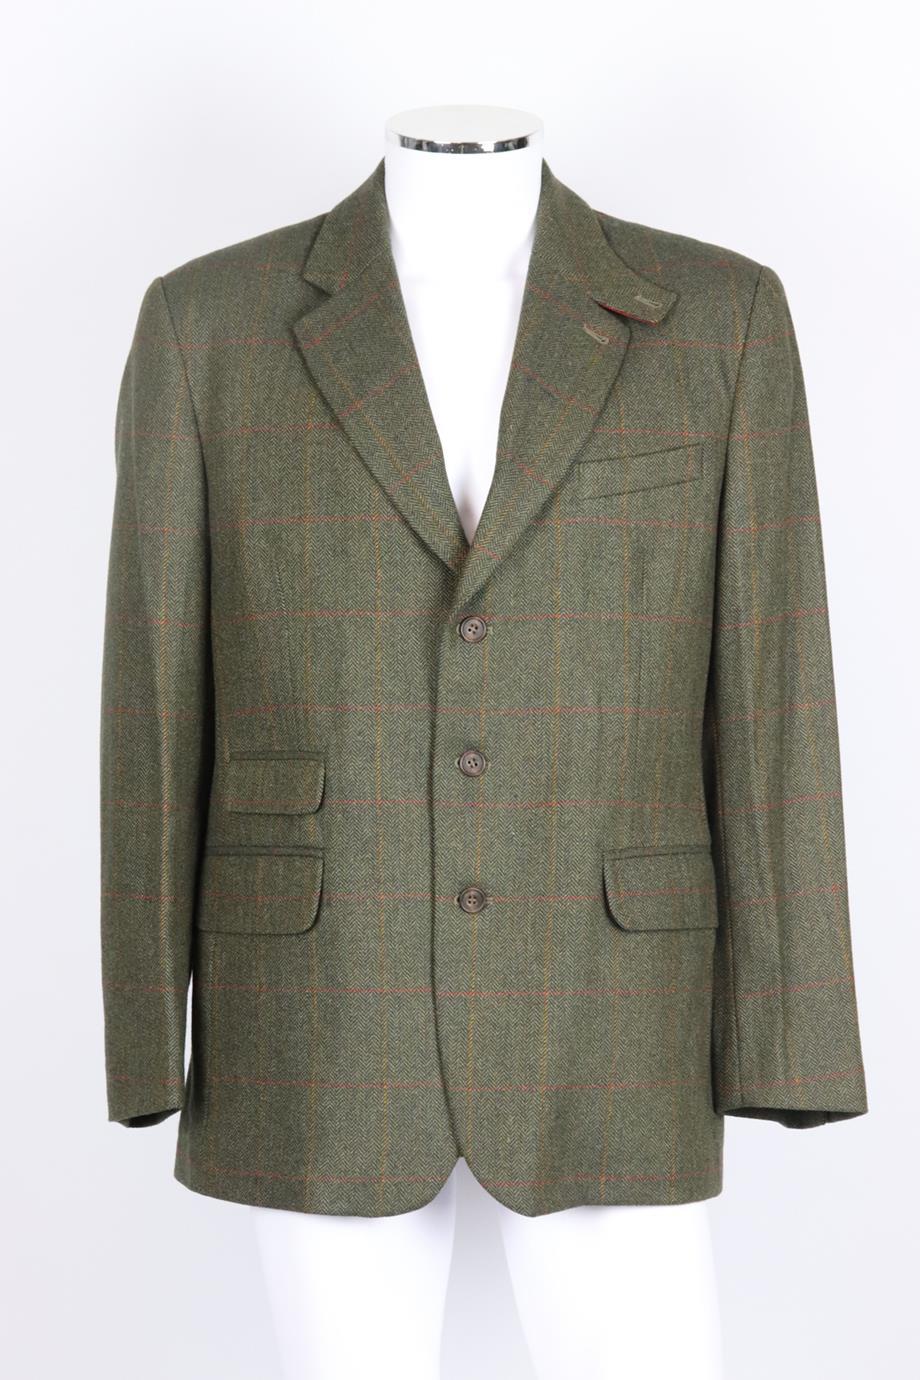 William & Son men's checked wool blend tweed blazer. Brown, red and yellow. Long sleeve, v-neck. Button fastening at front. 100% Wool; lining: 100% viscose. Size: XLarge (IT 52, EU 52, UK/US Chest 42). Chest: 45 in. Waist: 40.2 in. Hips: 48 in.